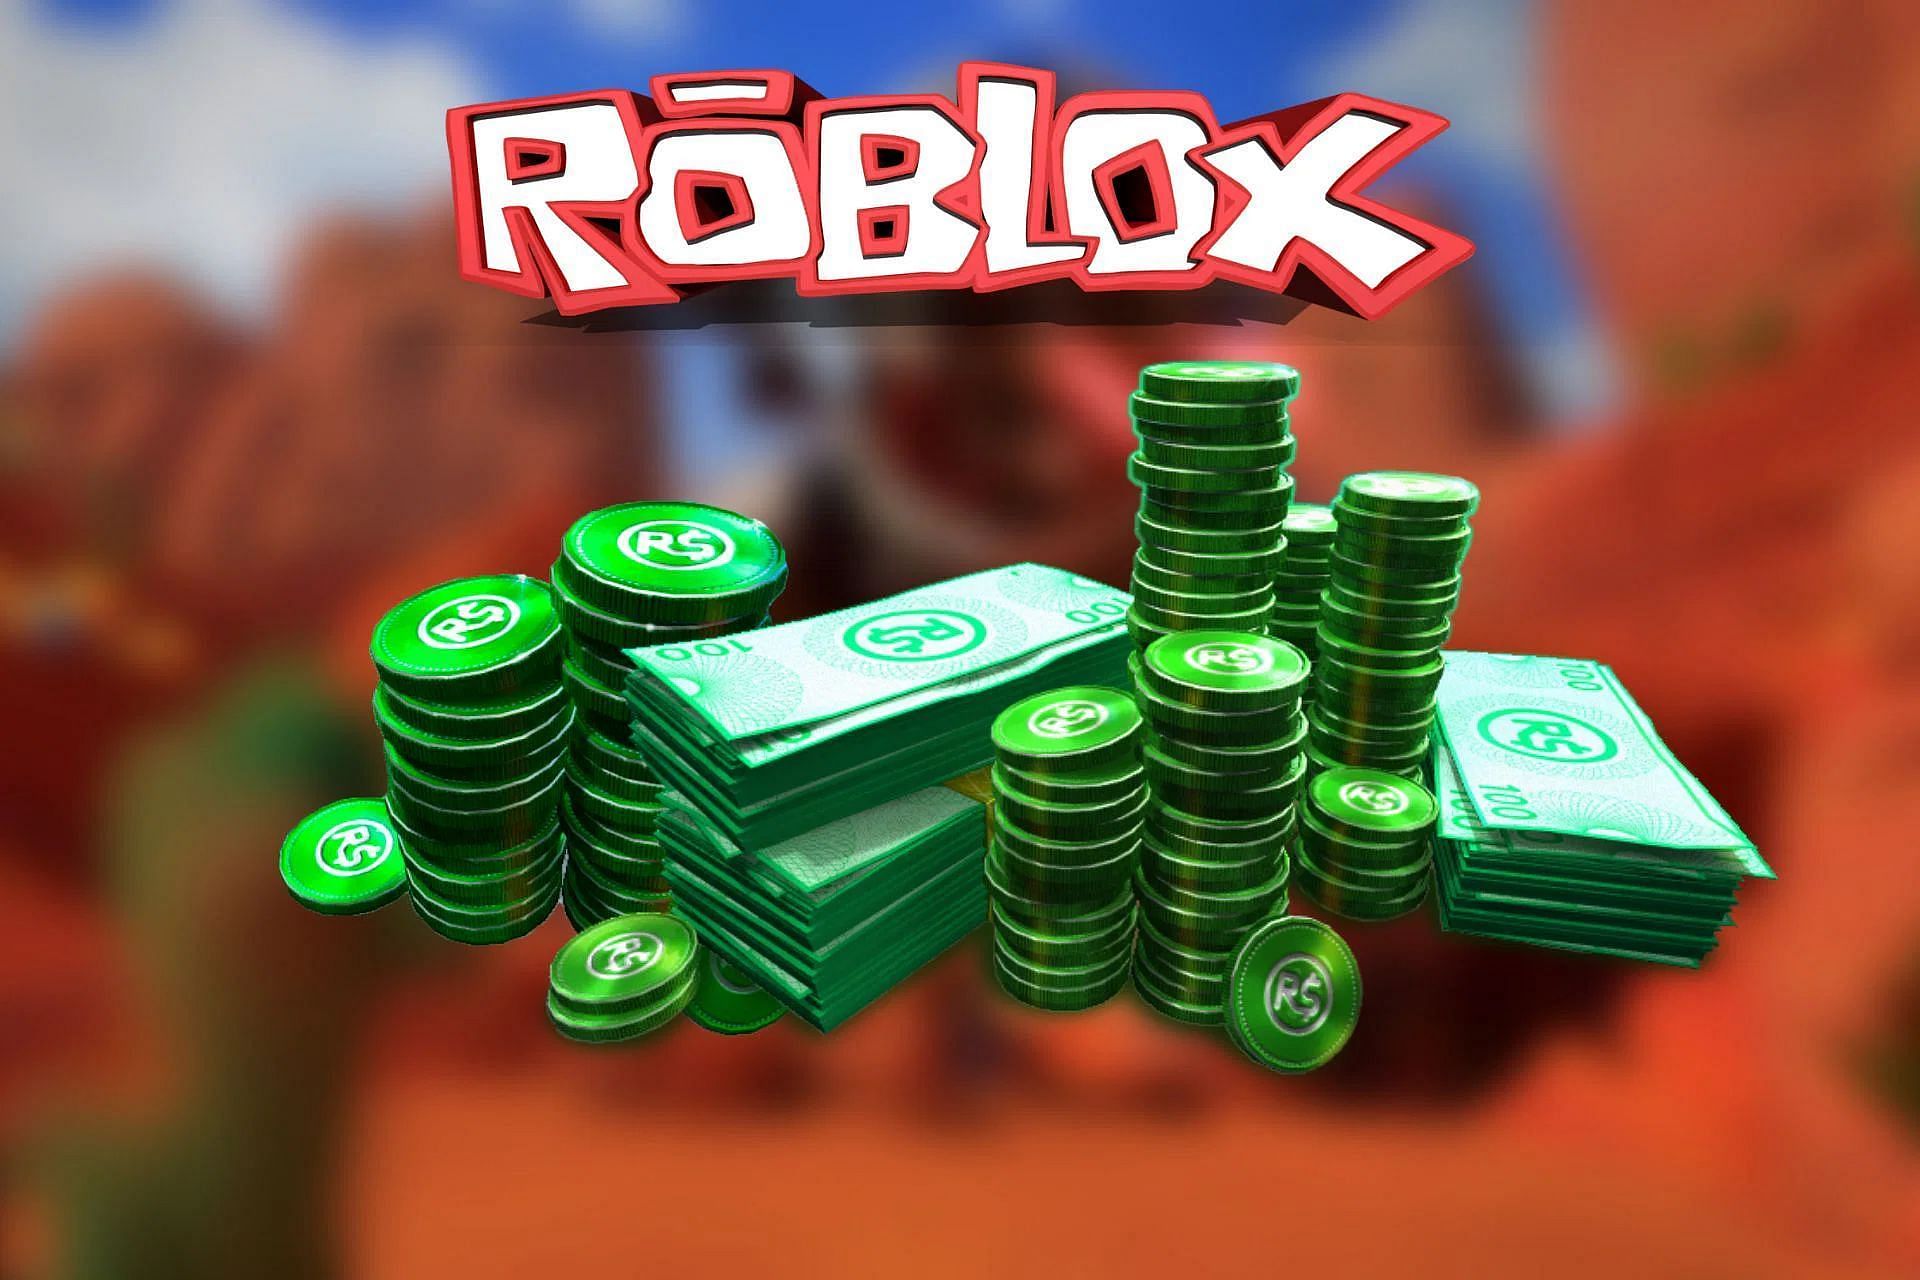 Robux in the game currency (Image via Roblox)